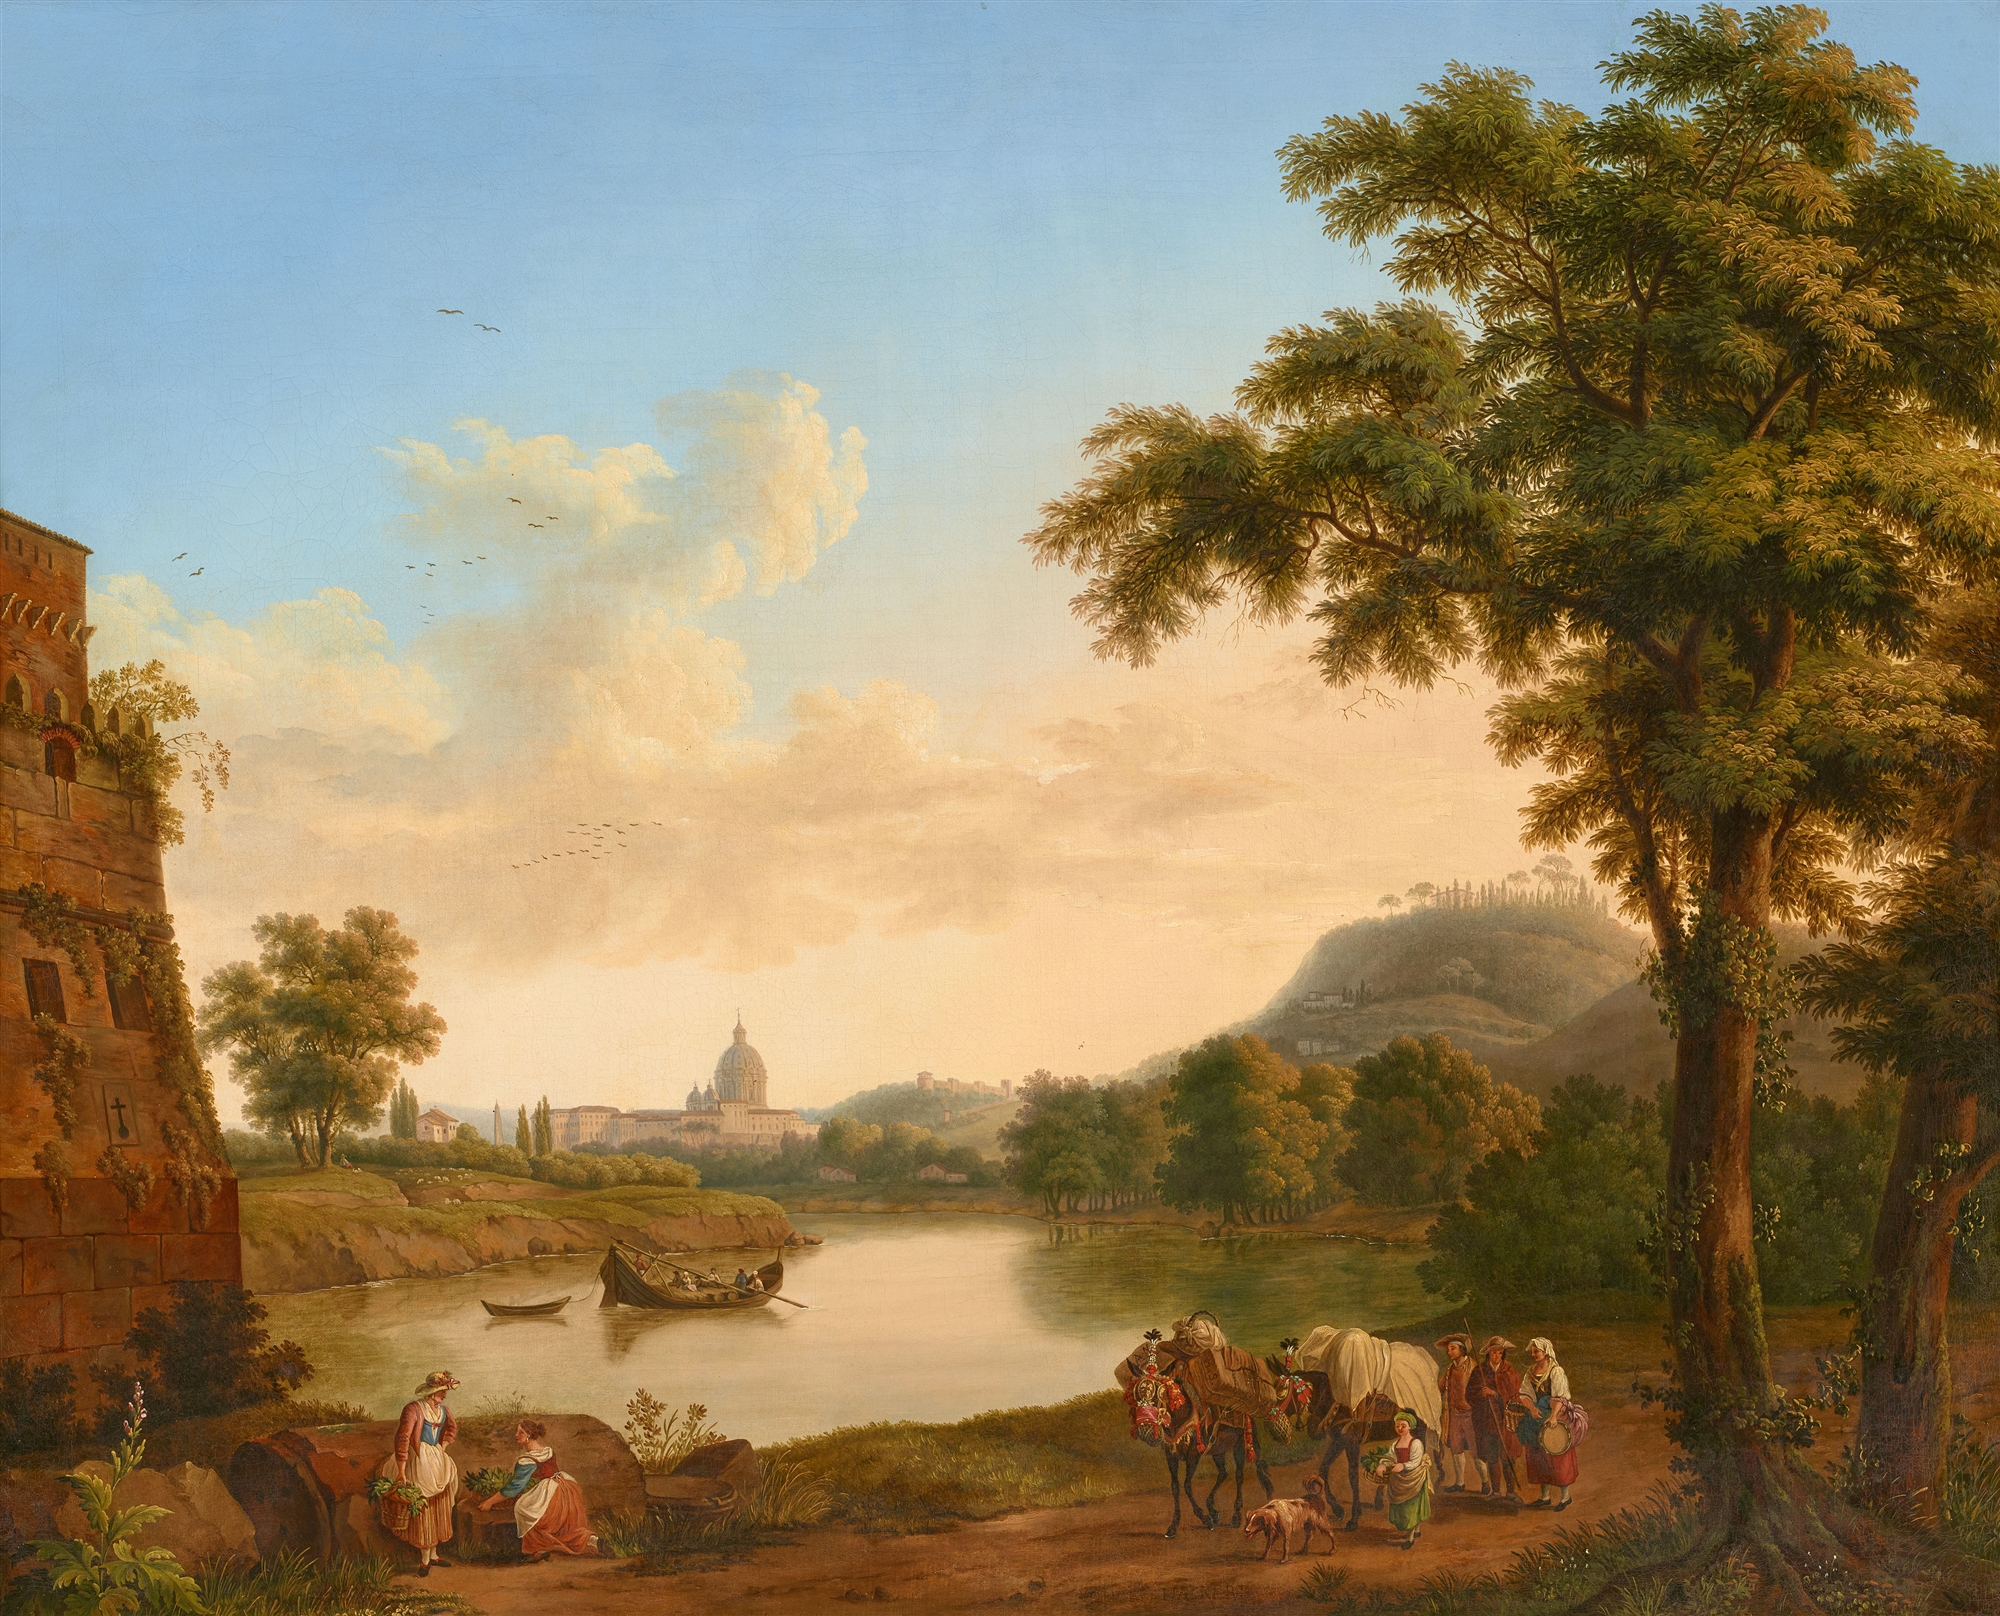 Jacob Philipp Hackert, View to the Tiber and St Peter's from Ponte Milvio